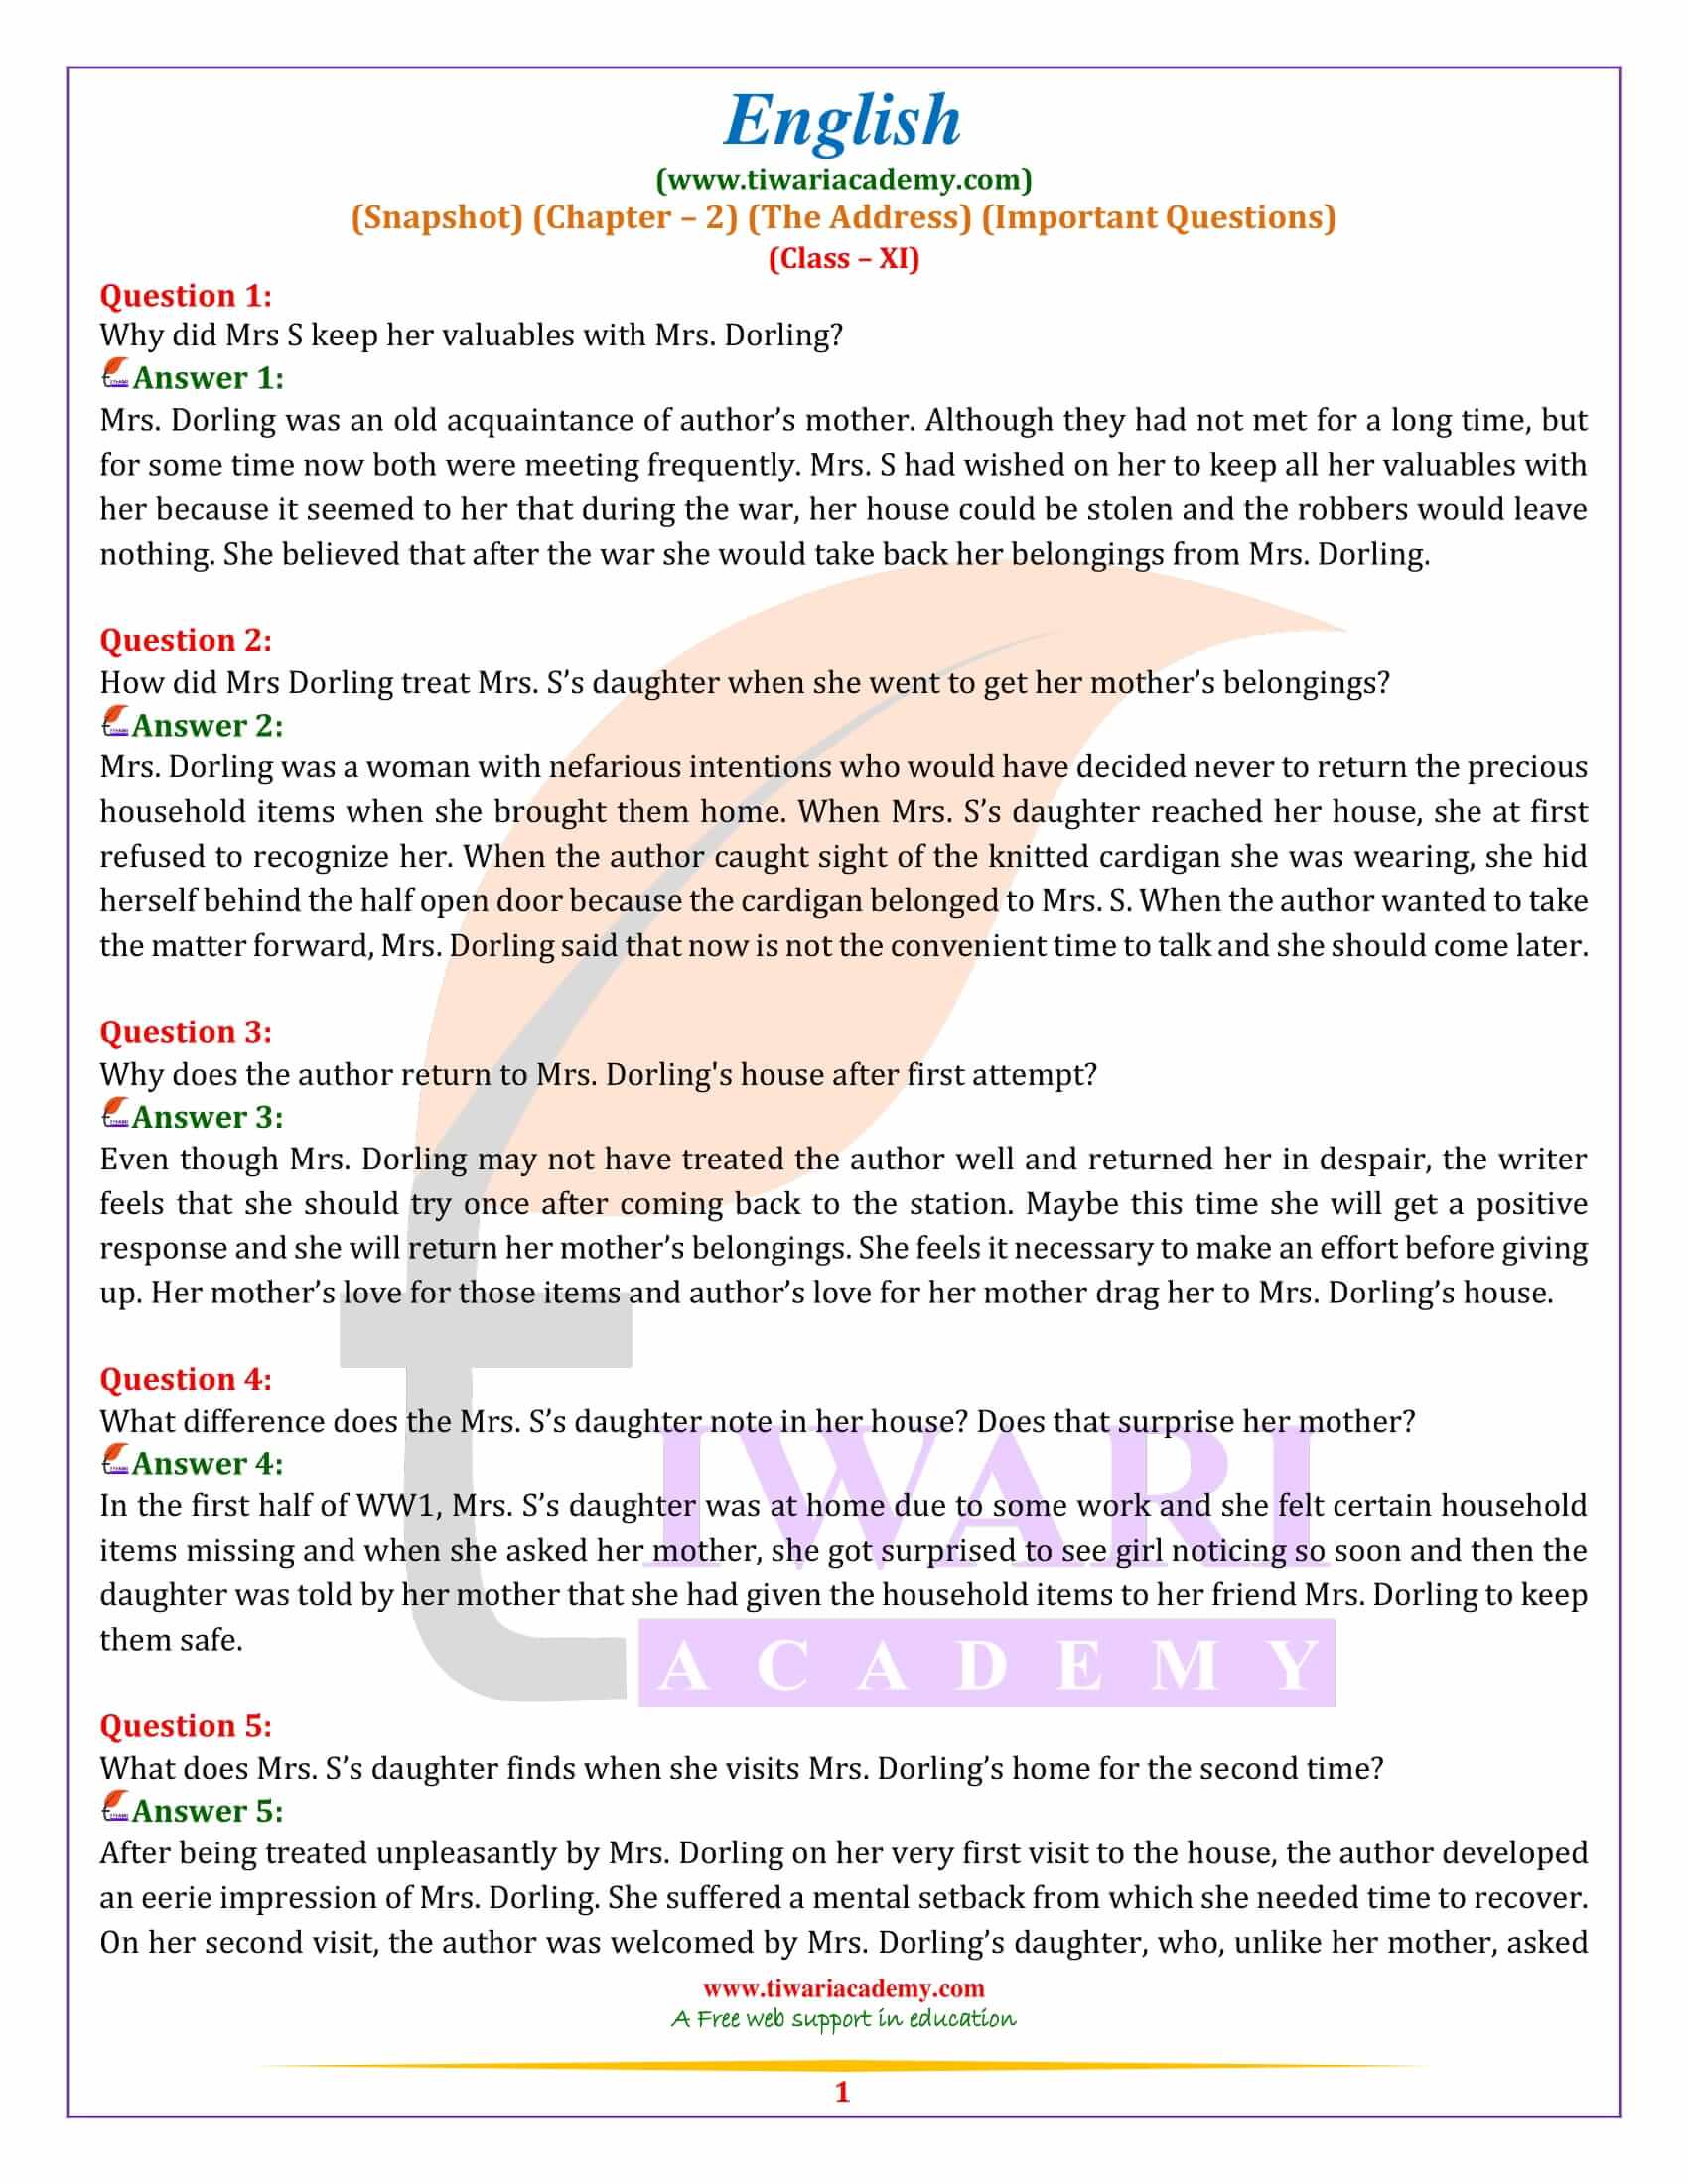 Class 11 English Snapshots Chapter 2 Extra Questions